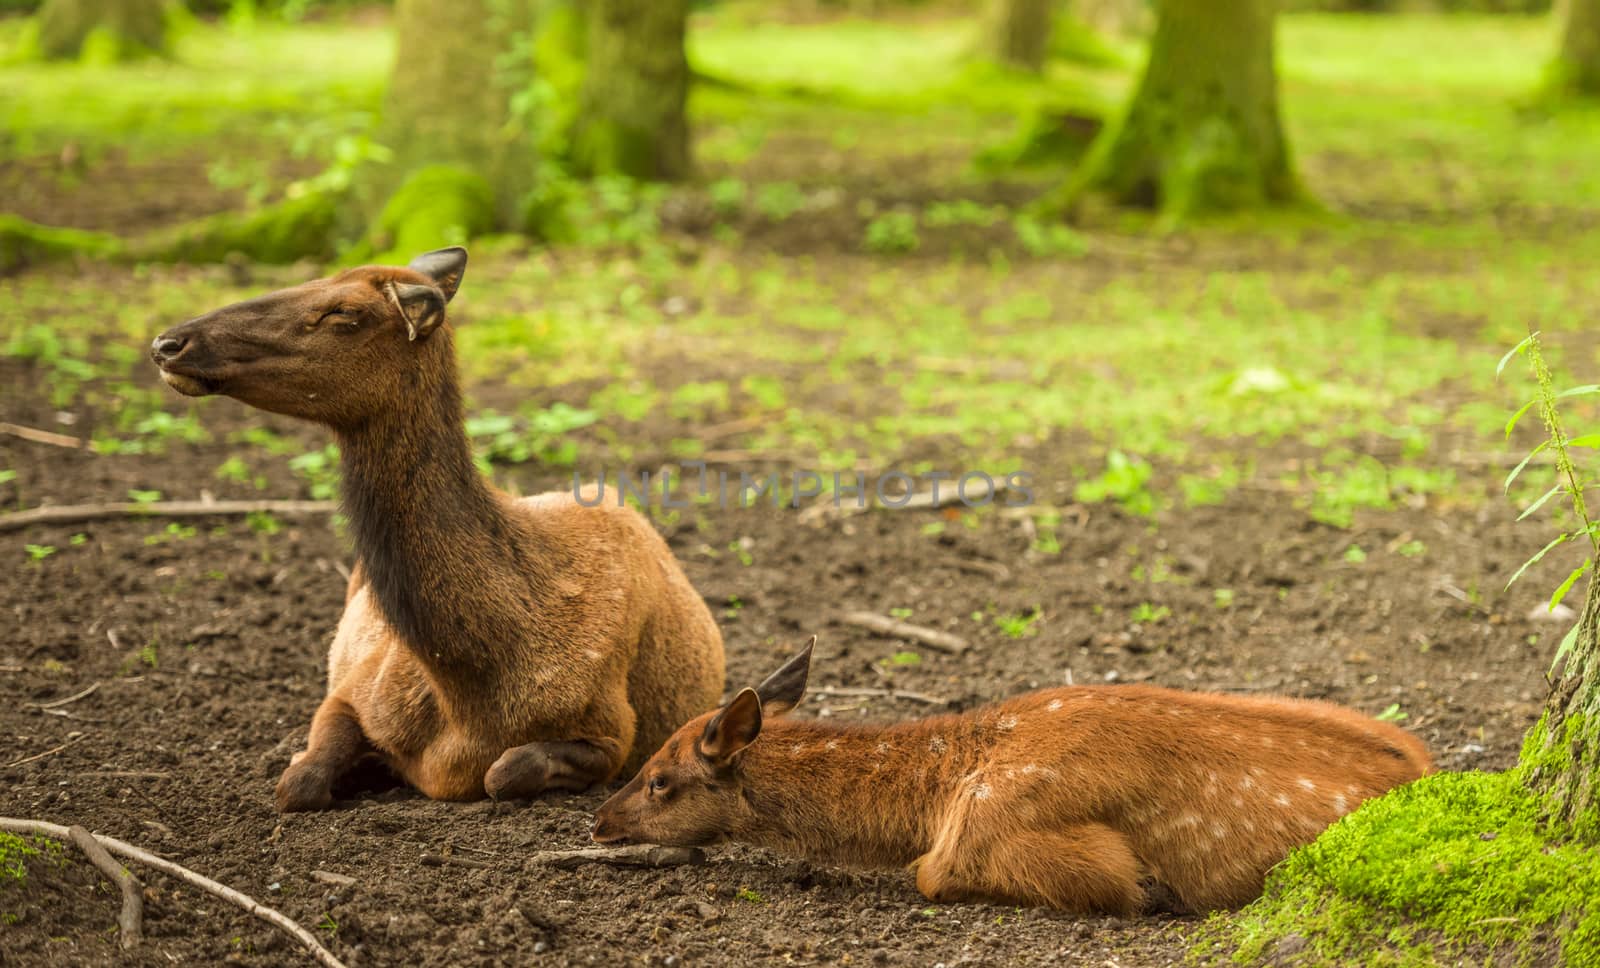 Baby deer and its mother resting in the forest, enjoying the sunlight on a sunny day of summer